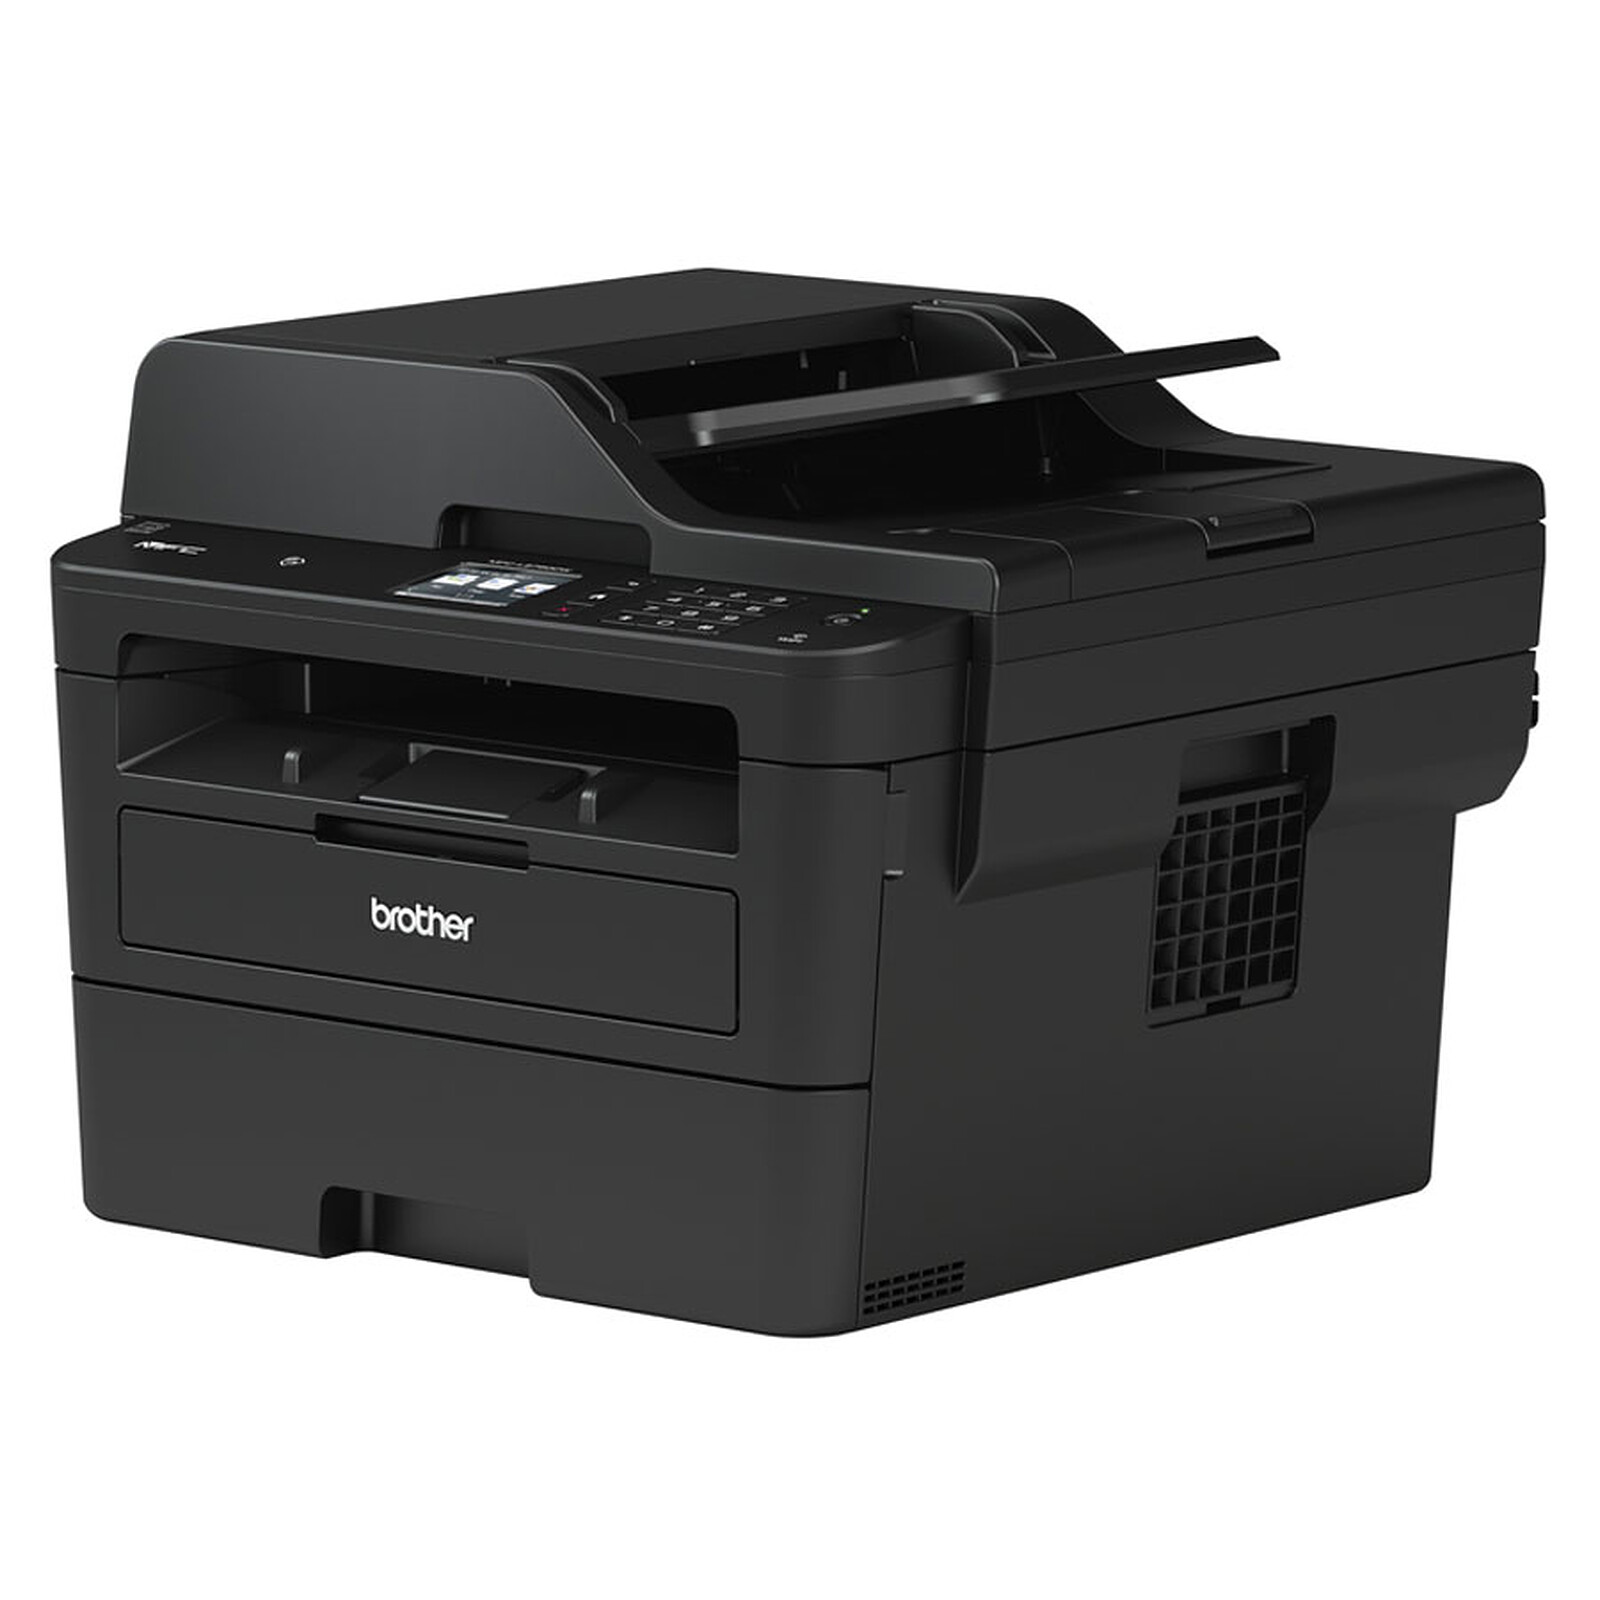 Brother MFC-L8390CDW - All-in-one printer - LDLC 3-year warranty